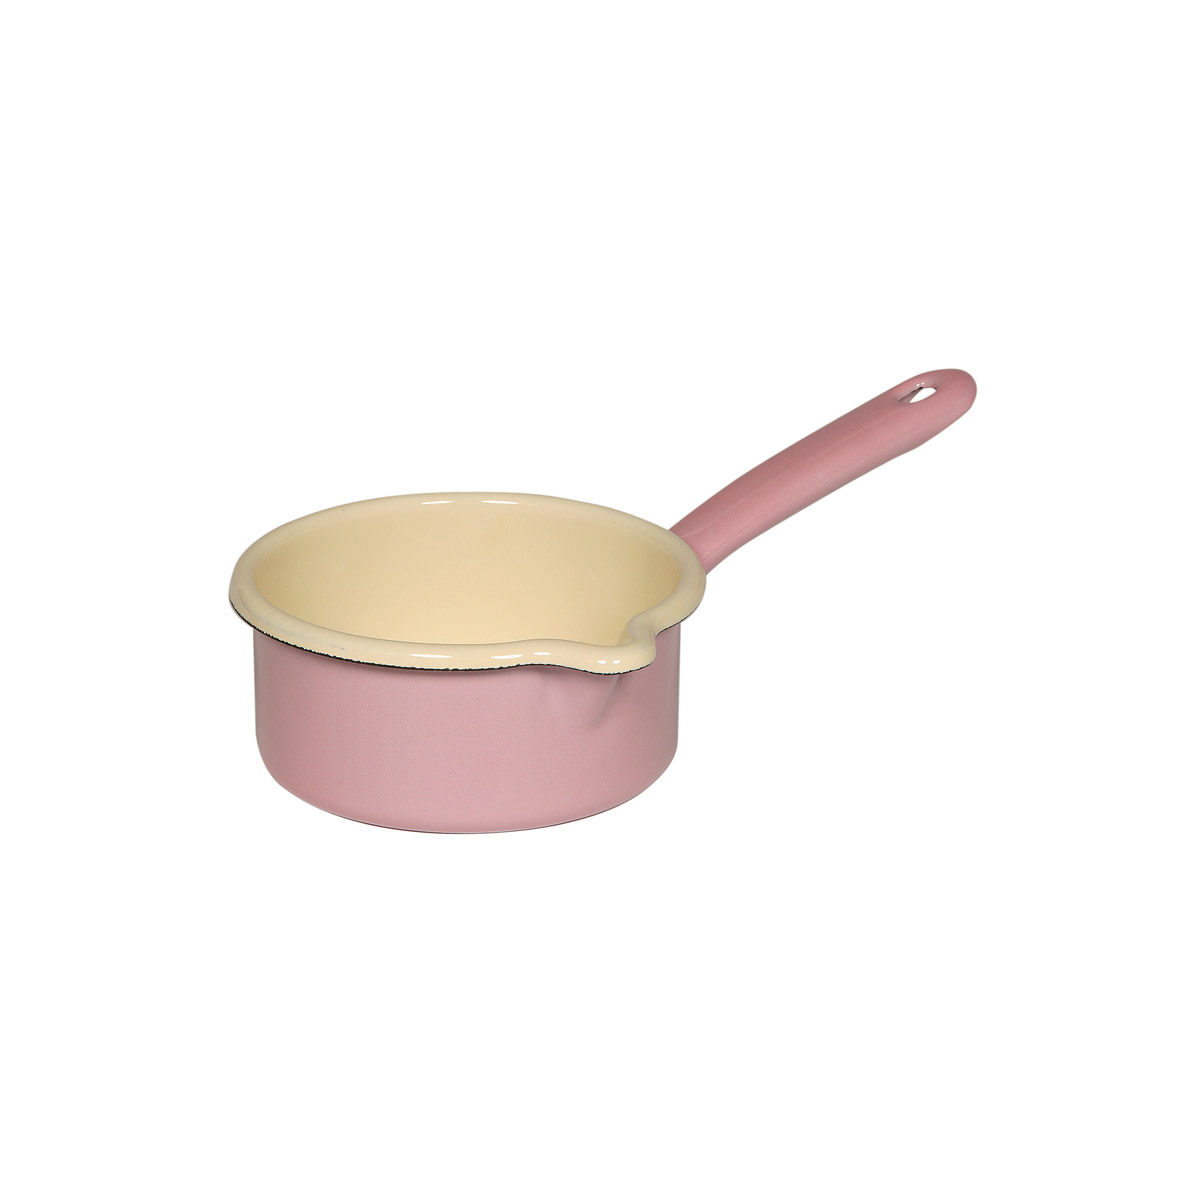 Riess Classic Bunt Pastell Stielkasserolle 12 cm / 0,5 L rosa - Emaille